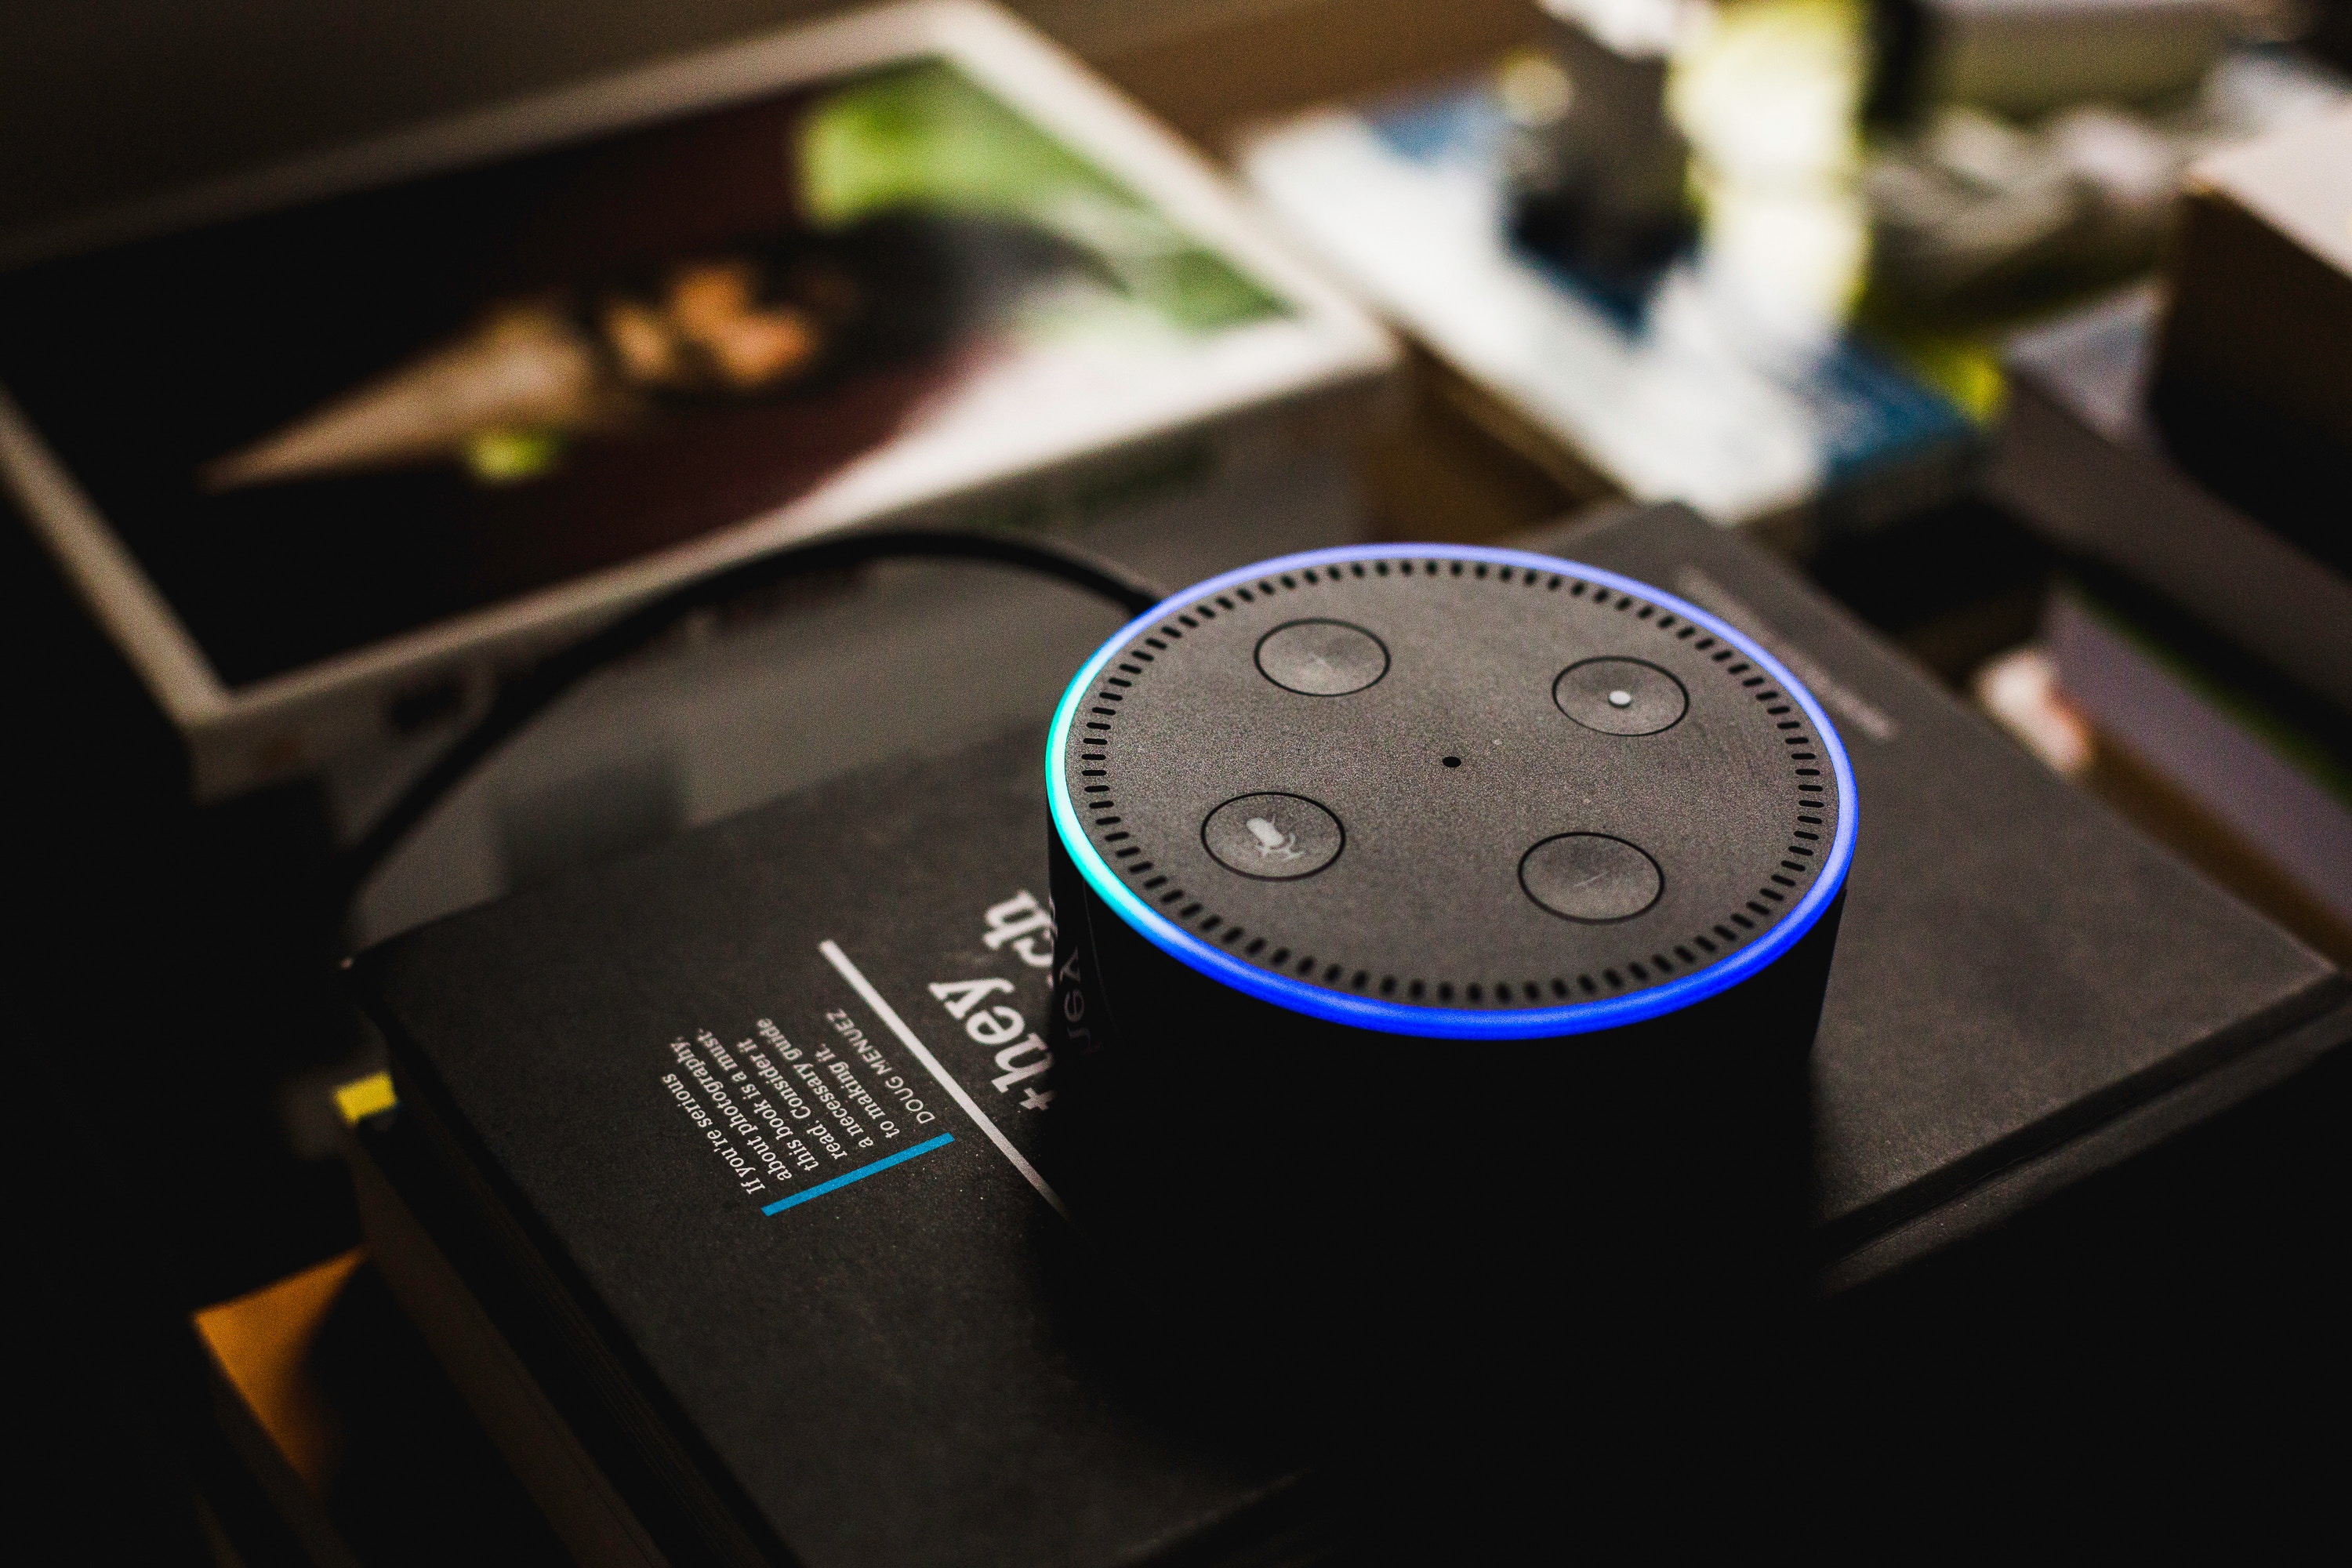 Amazon echo dot is one of the famous Personal Assistants | Photo by Andres Urena on Unsplash.